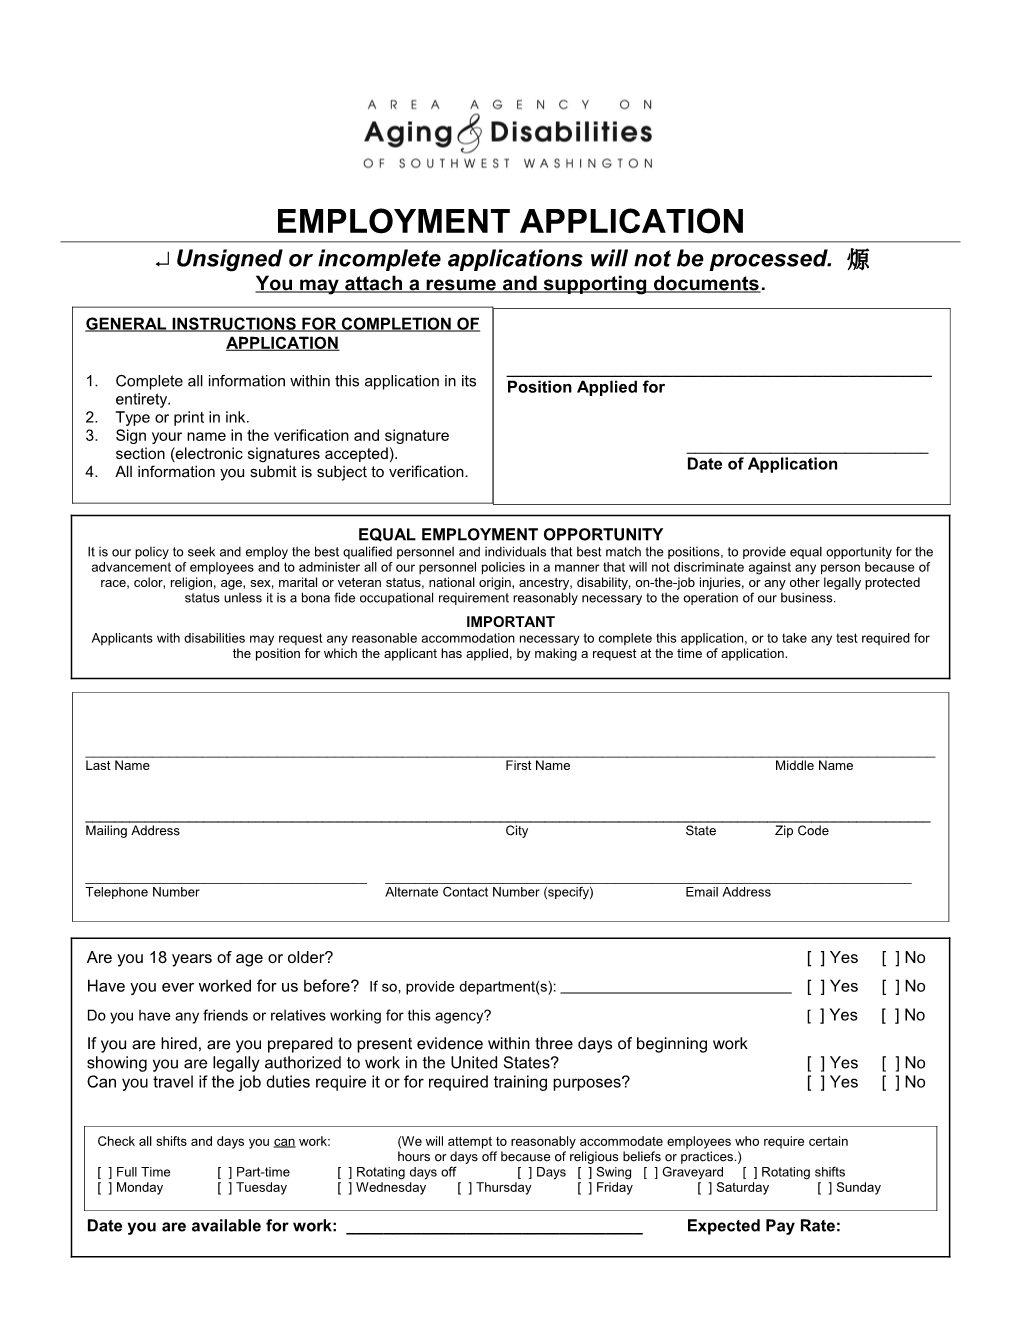 Application for Employment s97